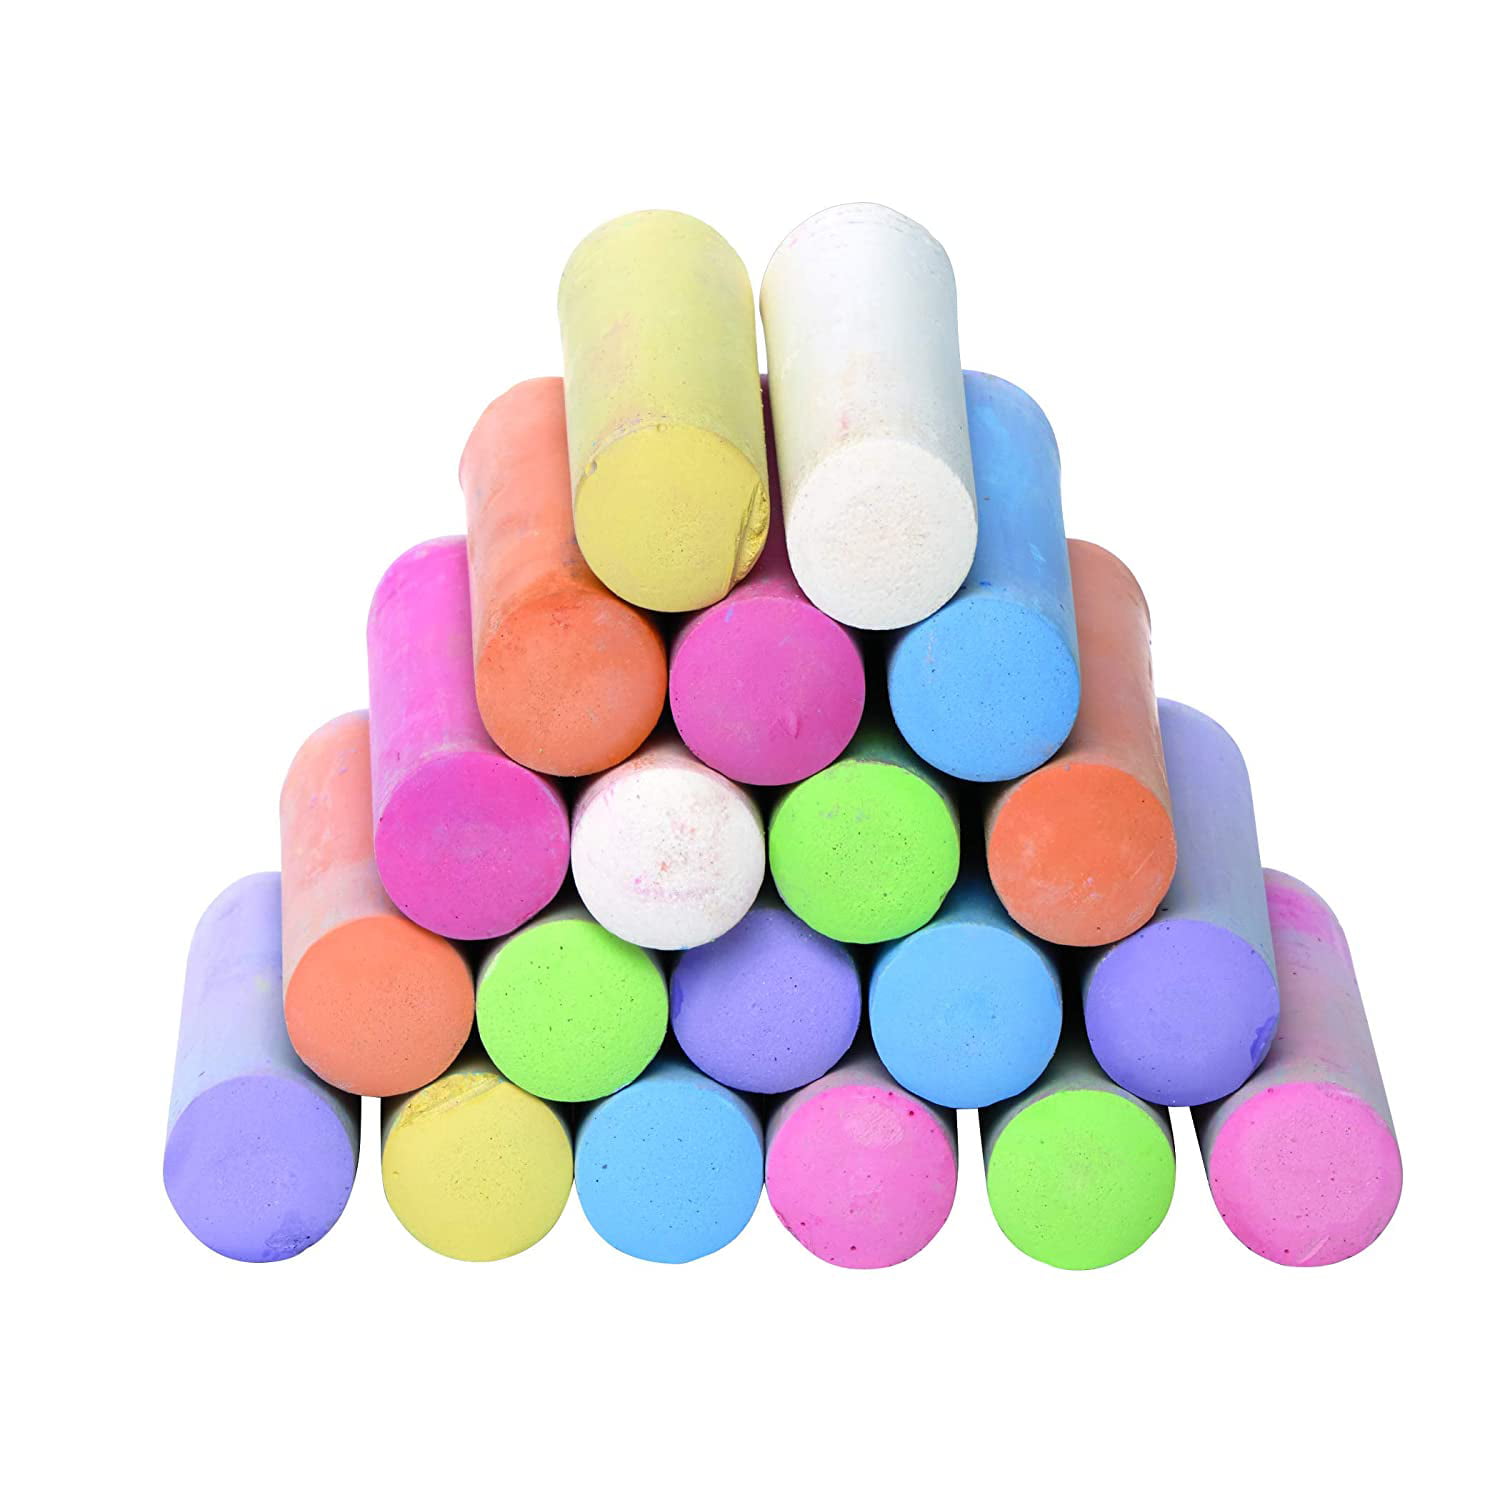 READY 2 LEARN Jumbo Sidewalk Chalk - Set of 126 in 9 Colors - Washable,  Non-Toxic, Colored Chalk - Chalk Bulk - Coupon Codes, Promo Codes, Daily  Deals, Save Money Today